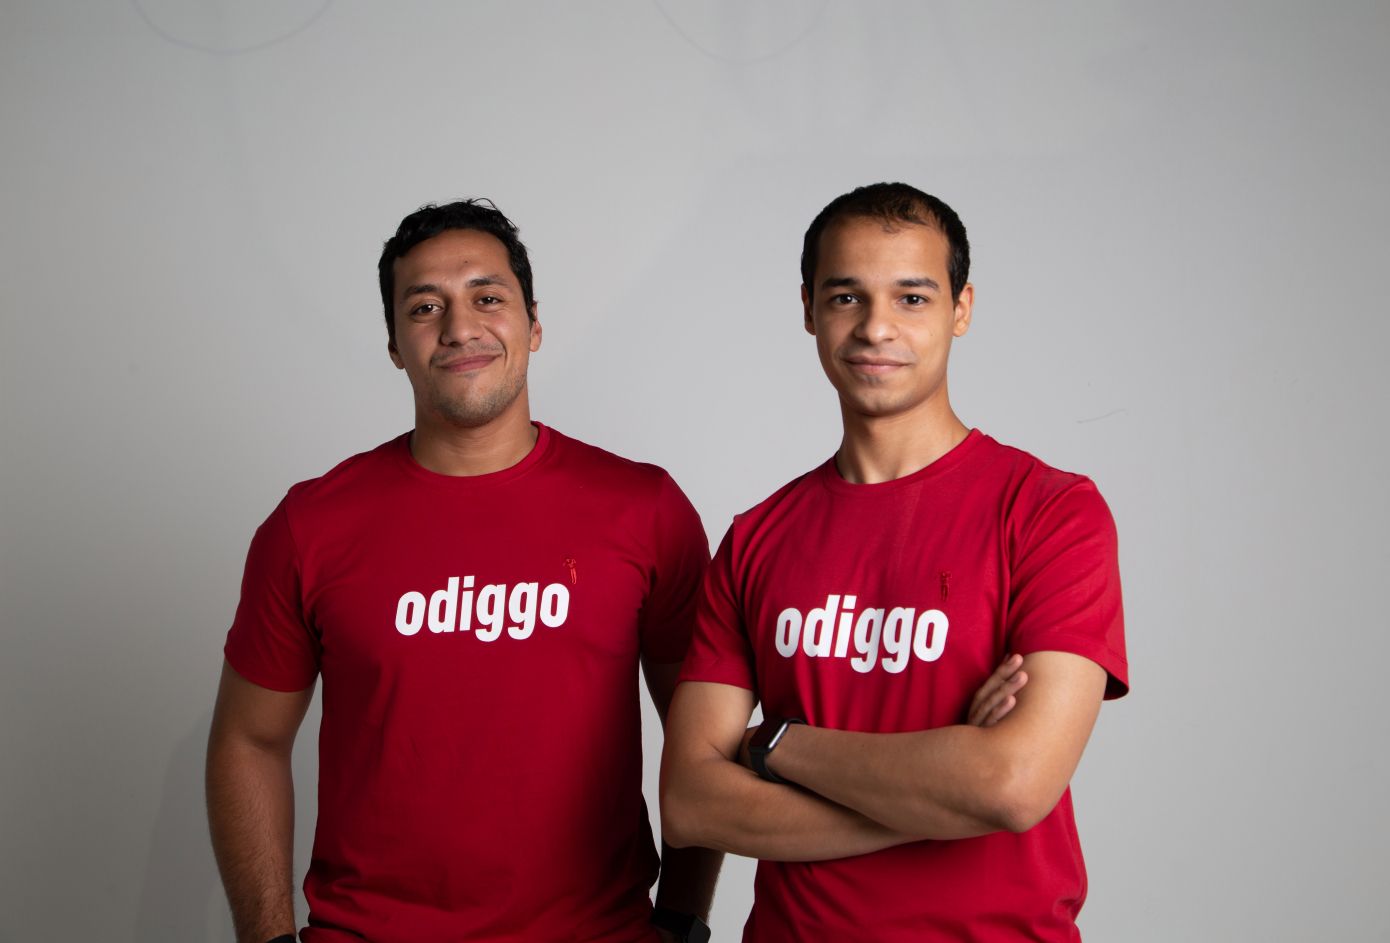 Egyptian auto-tech Startup, Odiggo raise $2.2m seed round from 500 Startups, Y Combinator and PlugAndPlay